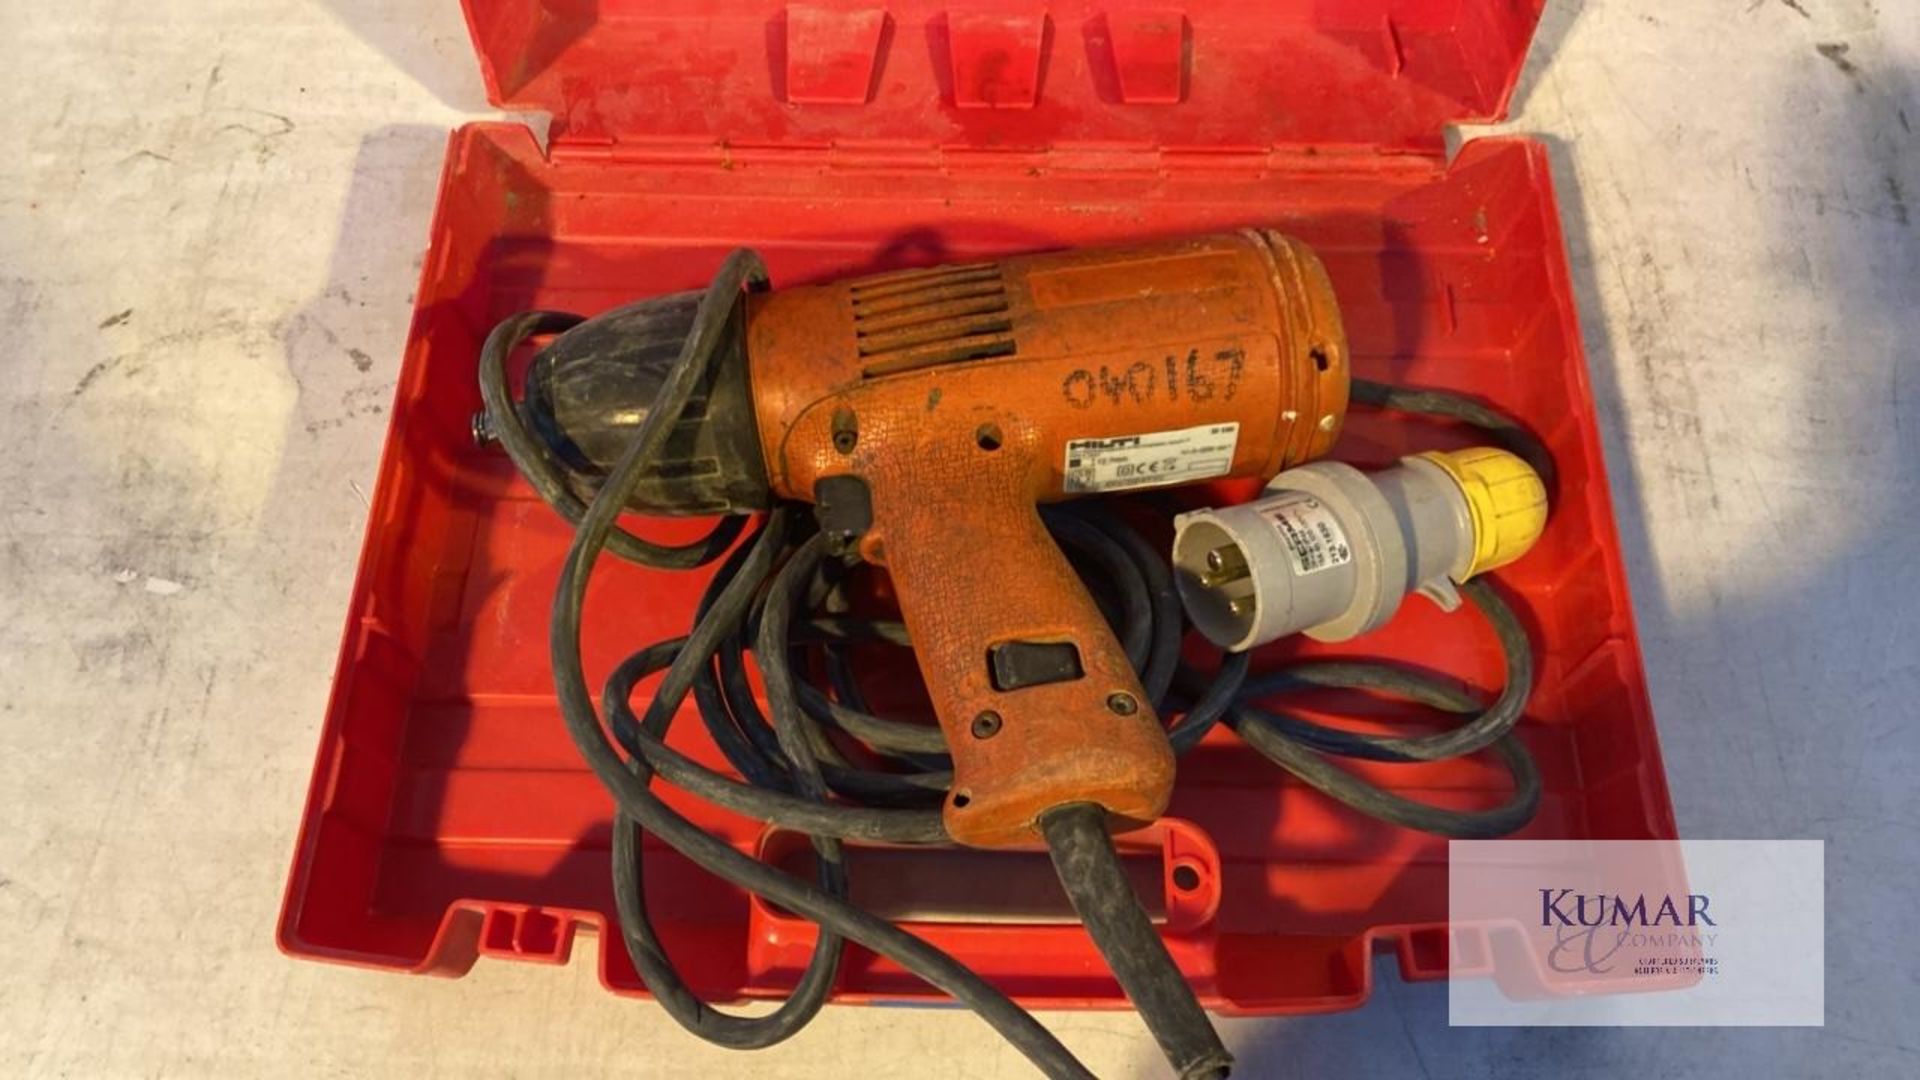 Hilti 110 Volt 1/2" Impact Wrench, 470 Watt, with Carry Case - Image 2 of 4